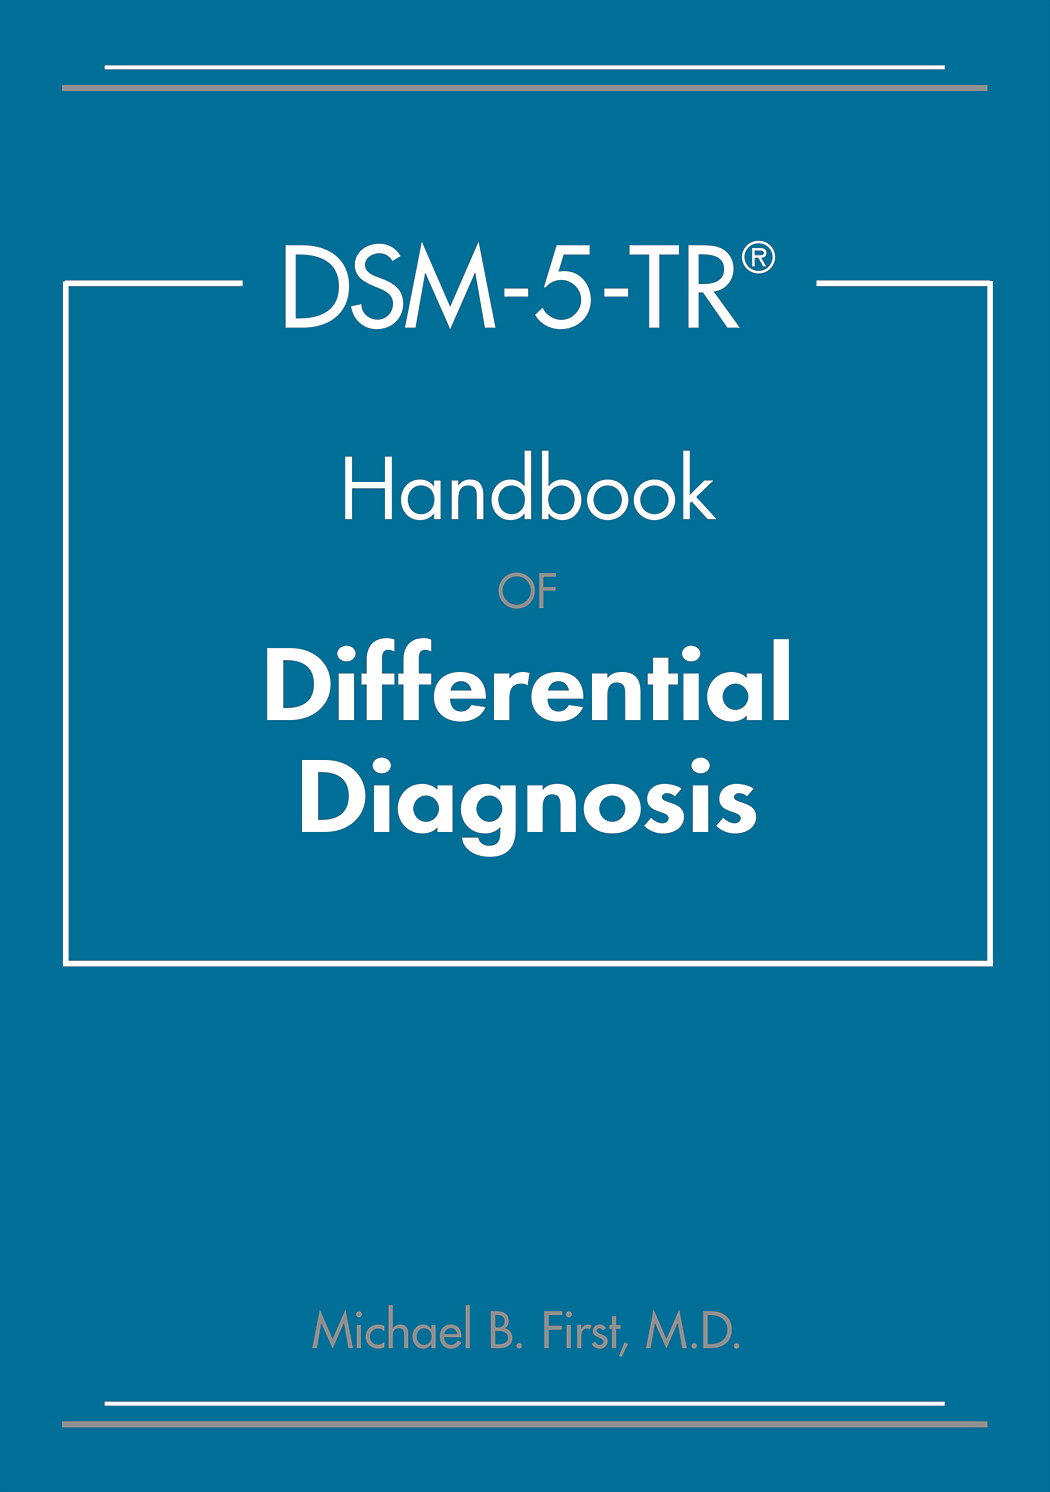 View Table of Contents for DSM-5-TR® Handbook of Differential Diagnosis